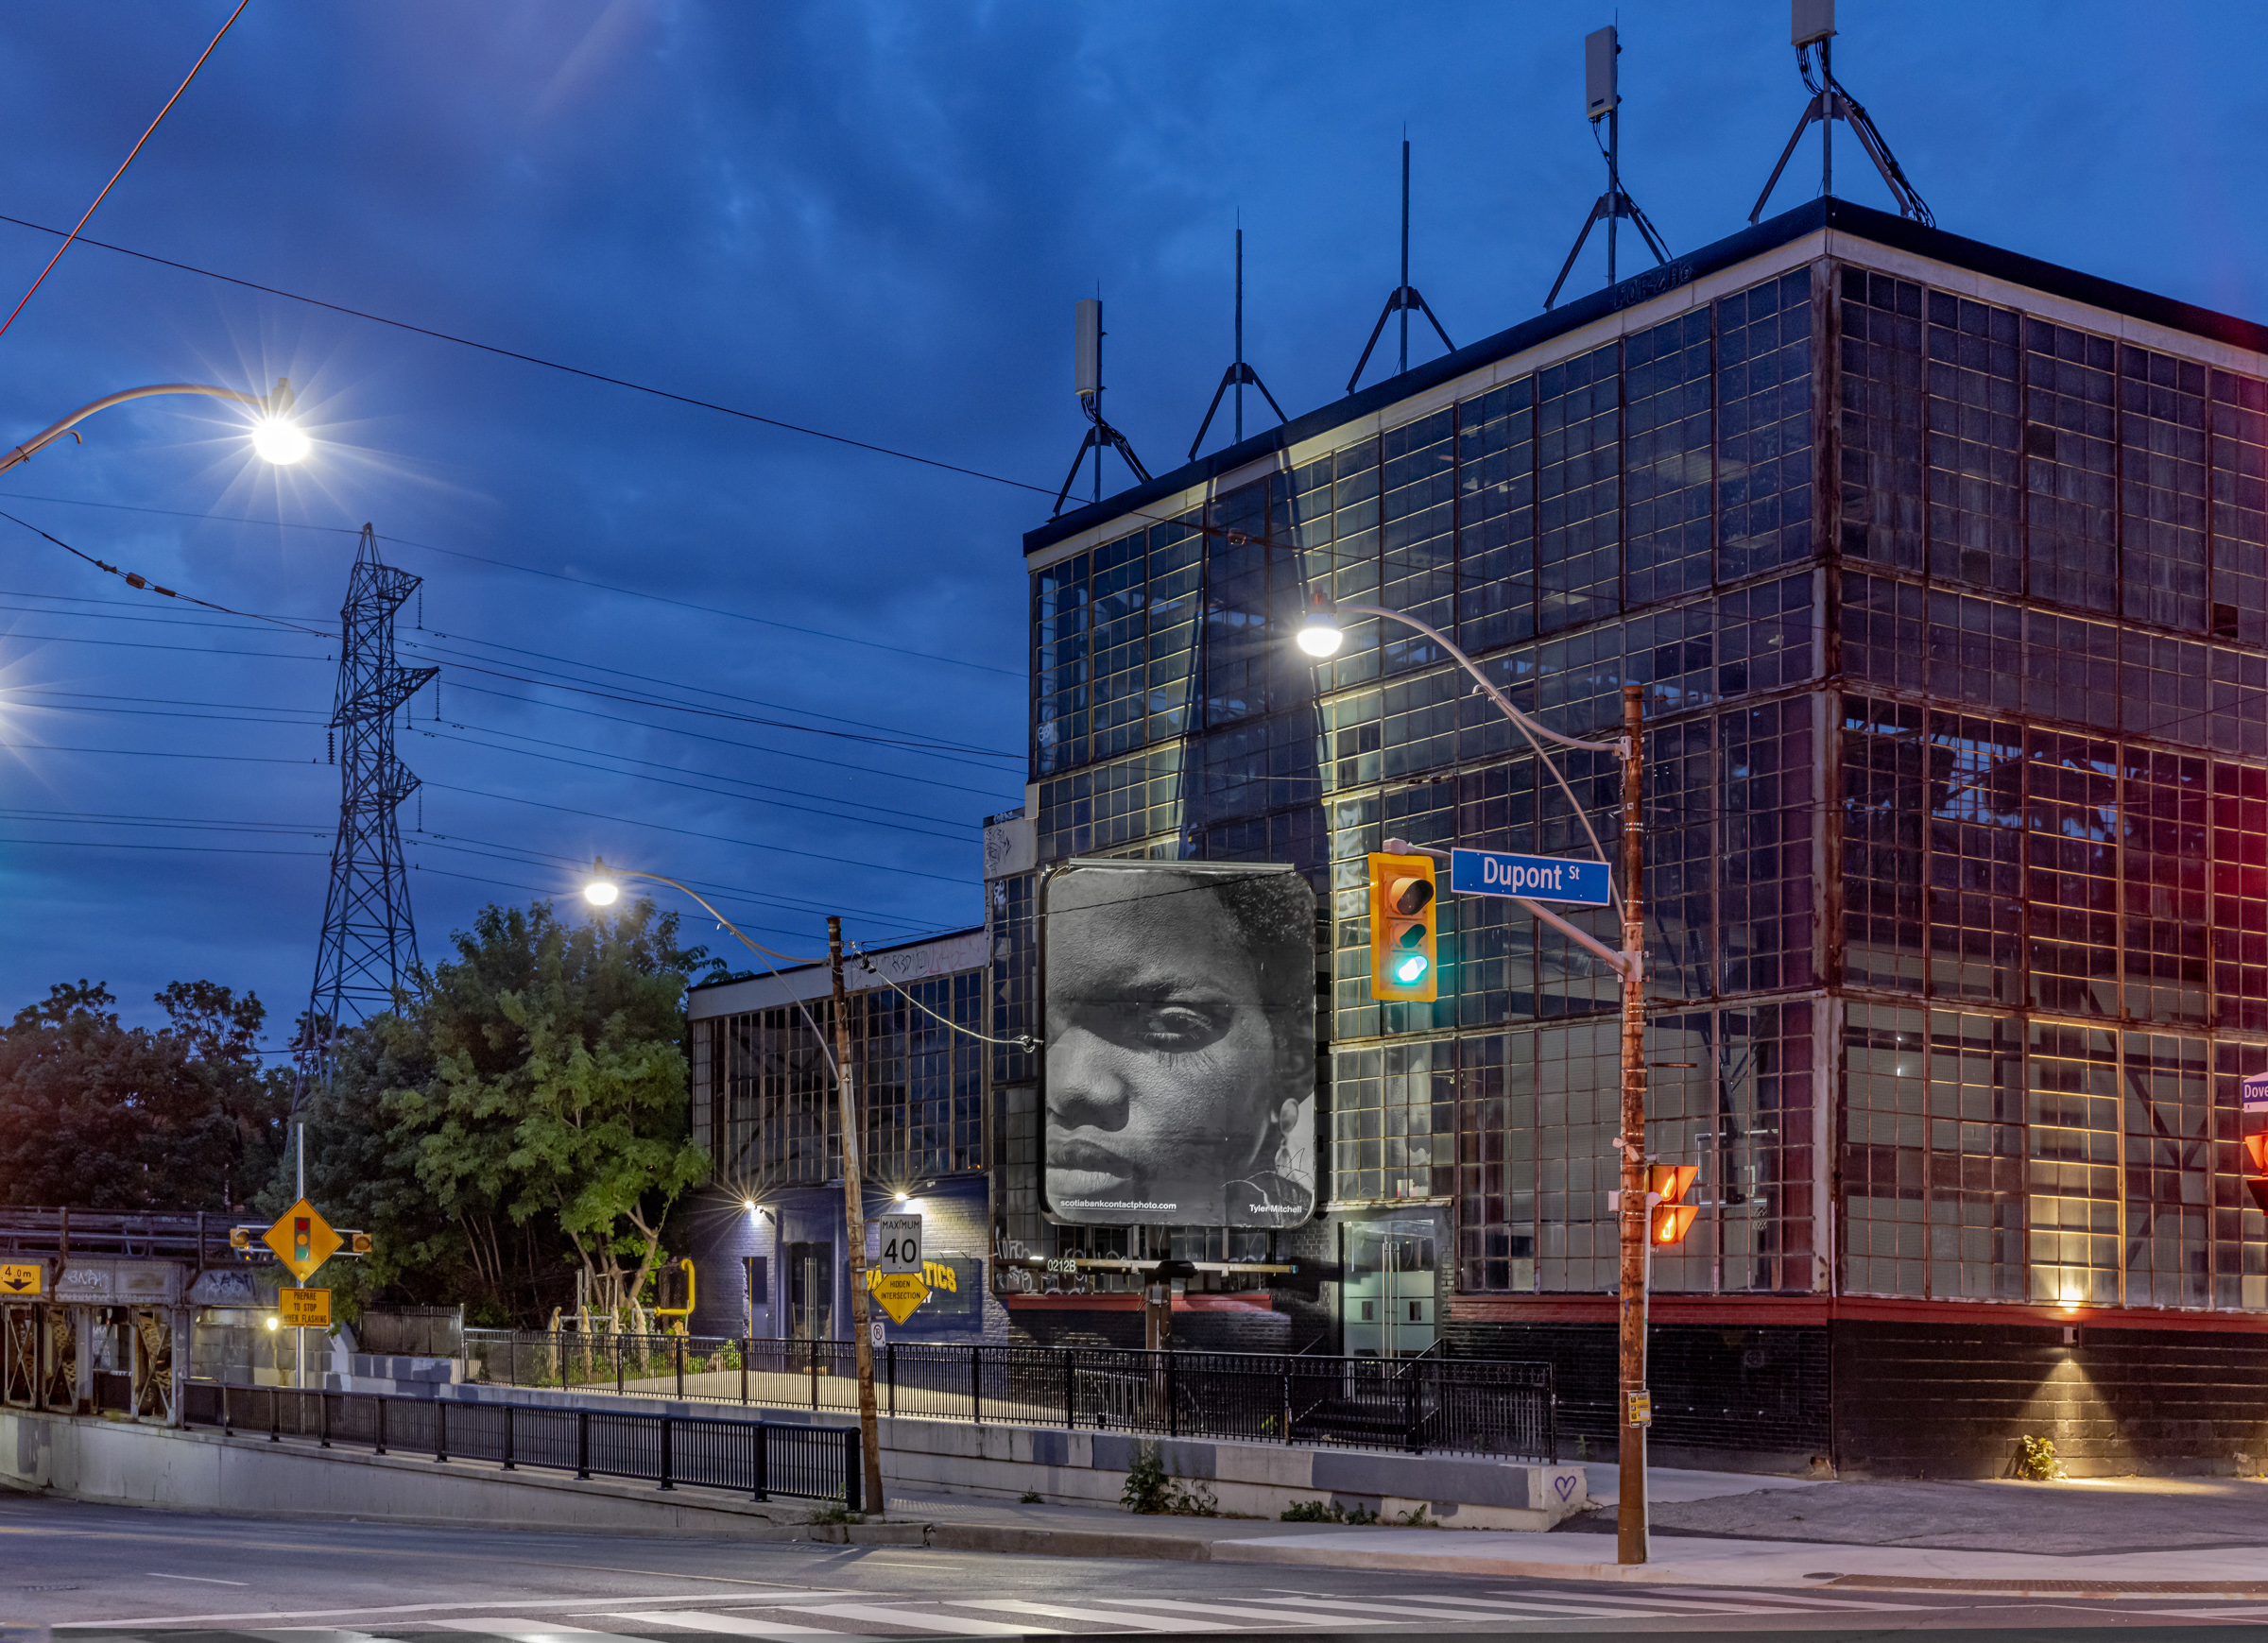     Tyler Mitchell, Cultural Turns, installation on billboards at Dovercourt Ave and Dupont St, Toronto, 2022. © Tyler Mitchell. Courtesy of the artist, Jack Shainman Gallery, New York, and CONTACT. Photo: Toni Hafkenscheid

